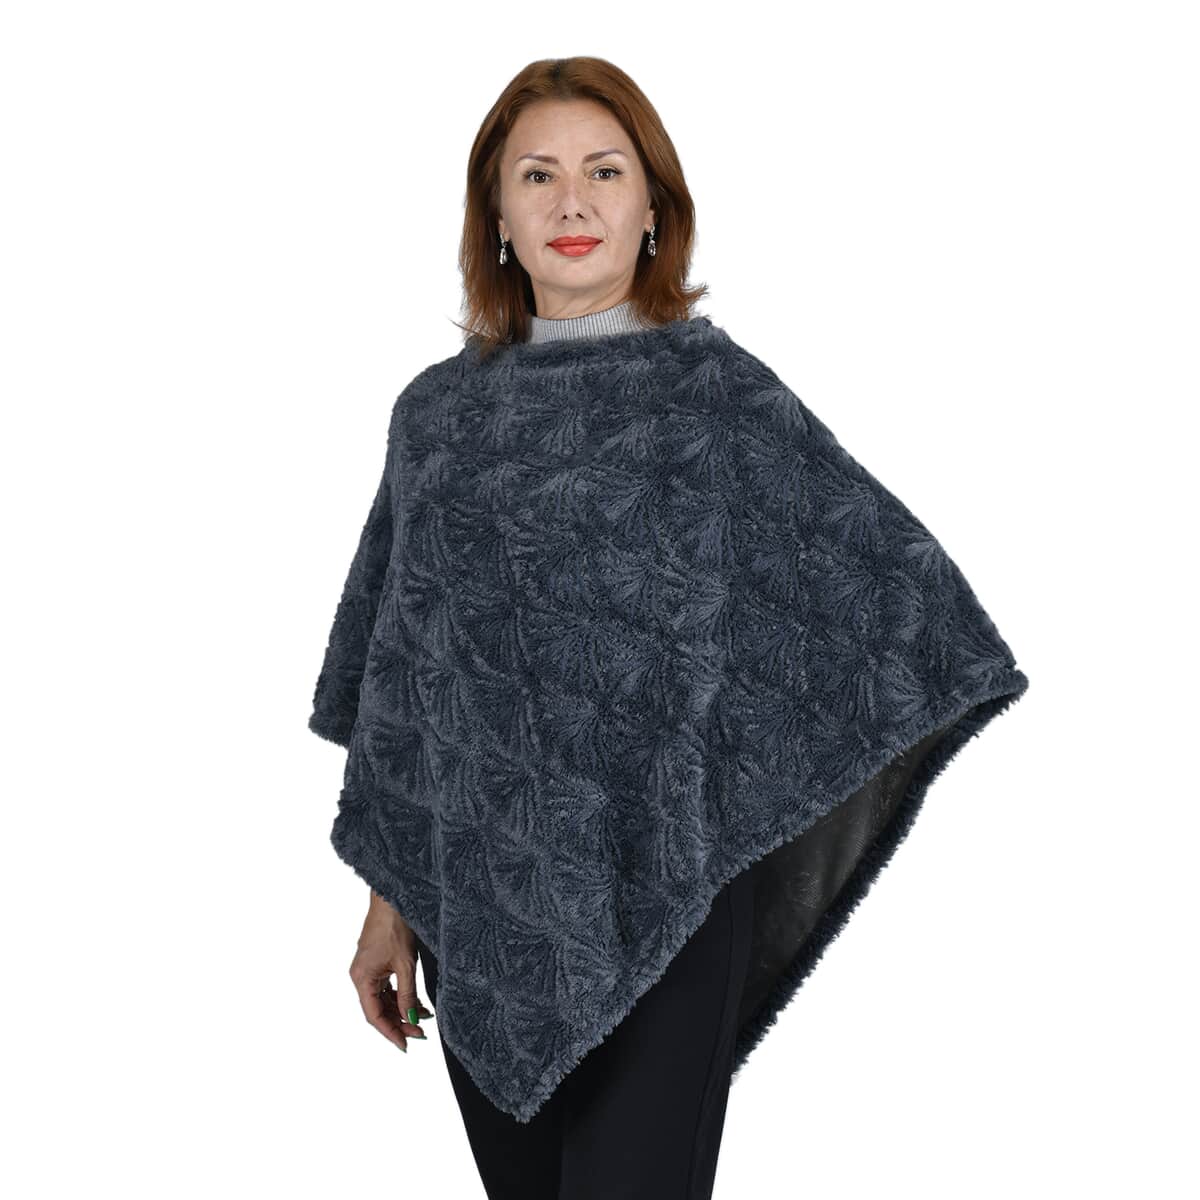 " PASSAGE Faux fur poncho Material: 100% polyester. Size: W33.5XL39 inch Weight:185g Color: Black " image number 0